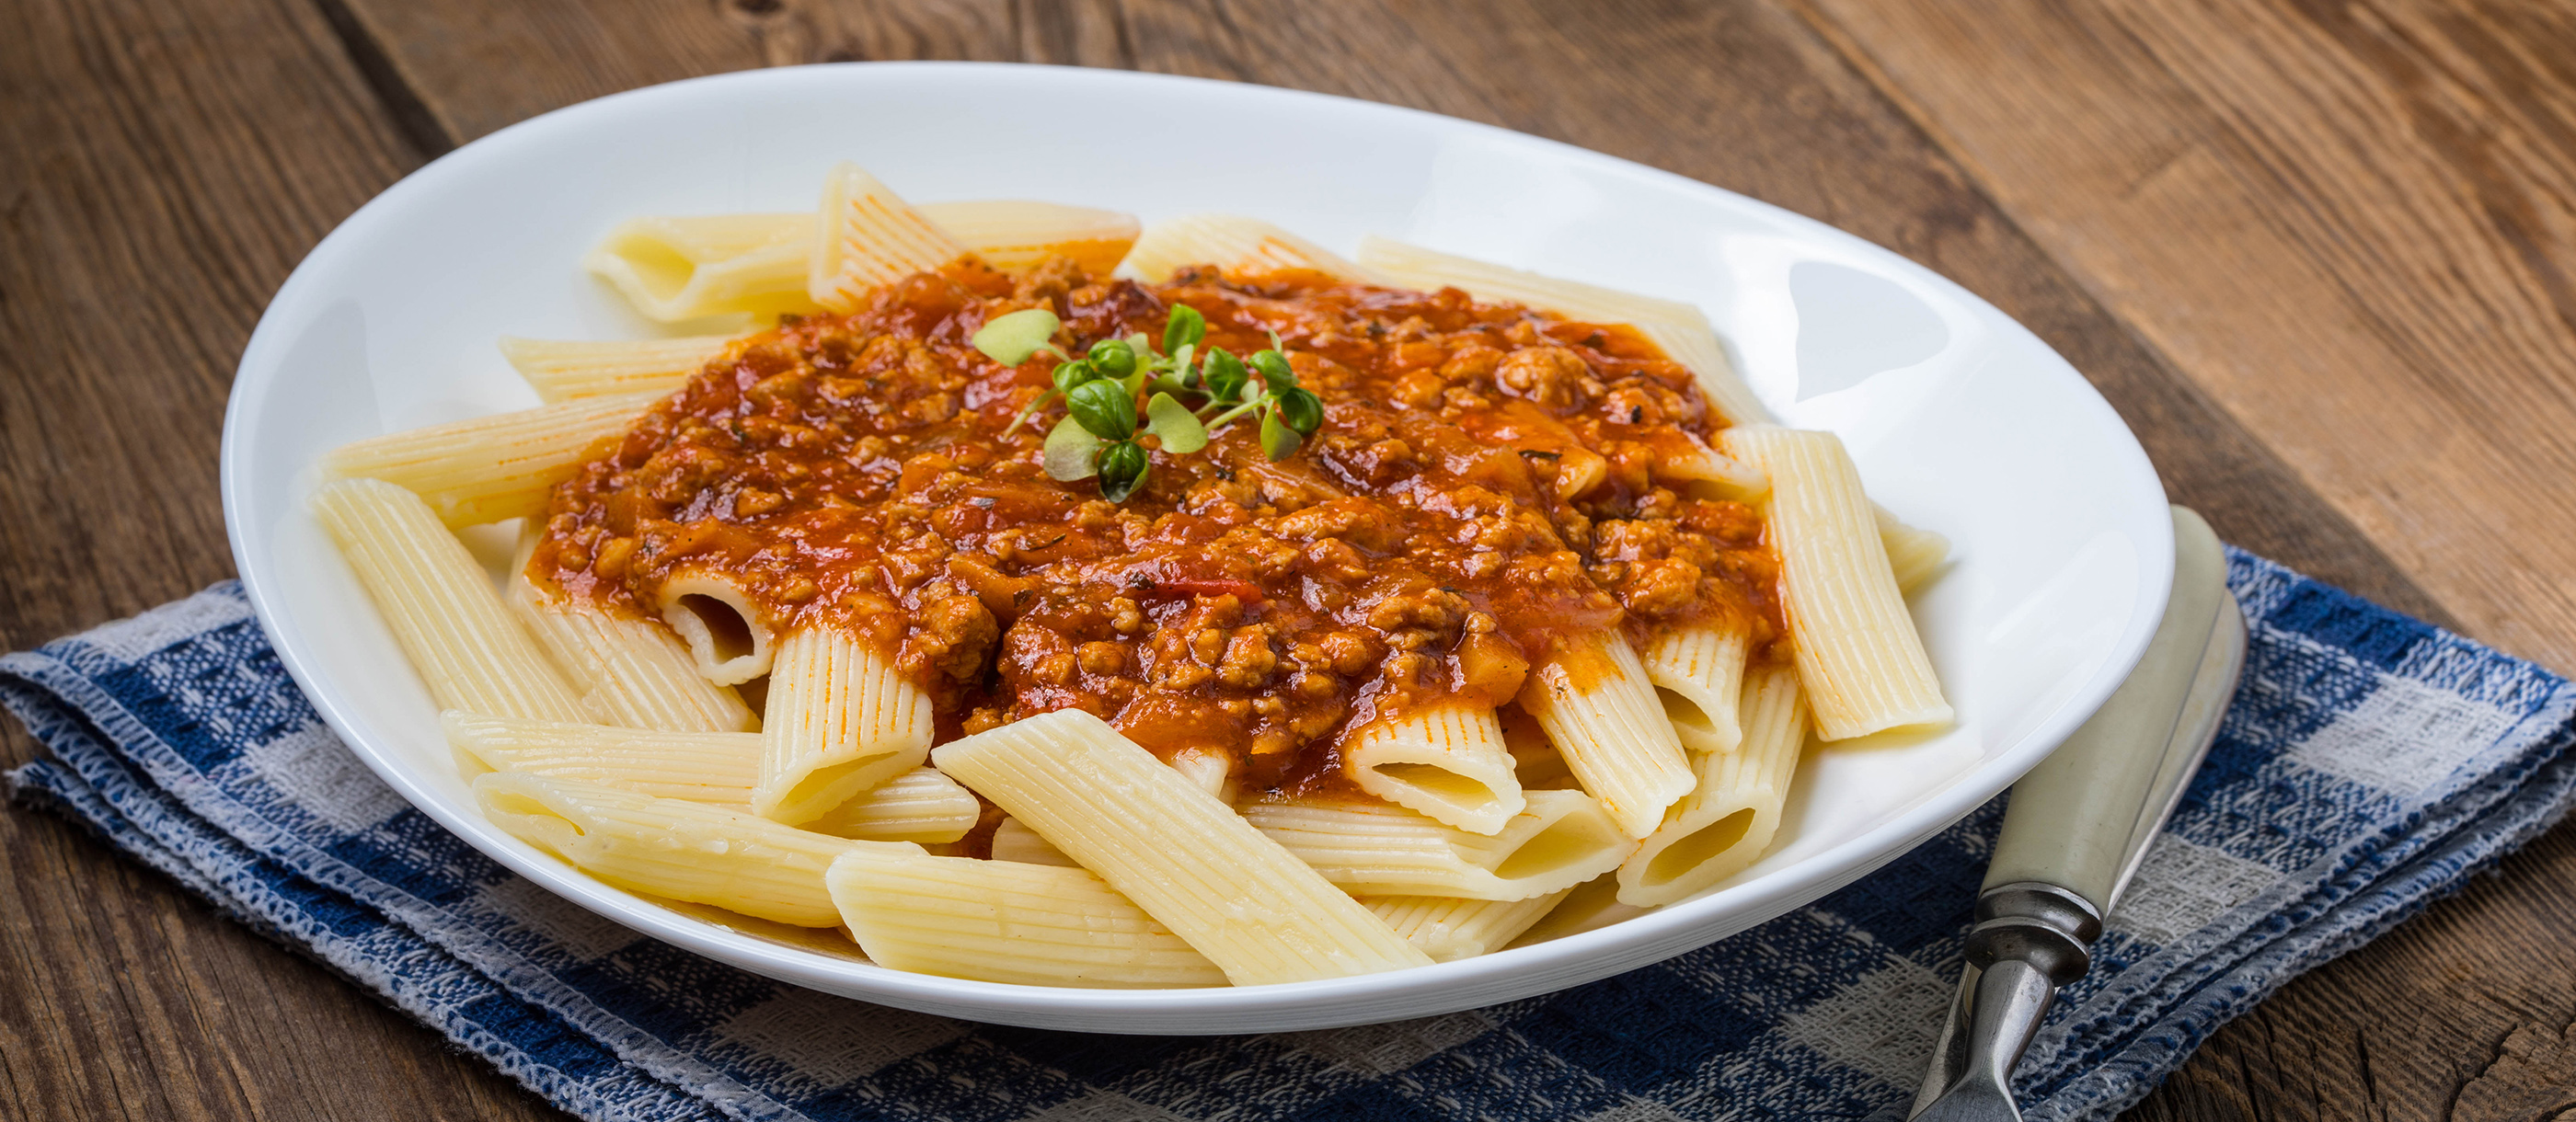 Ragù Alla Romagnola | Traditional Meat-based Sauce From Emilia-Romagna,  Italy